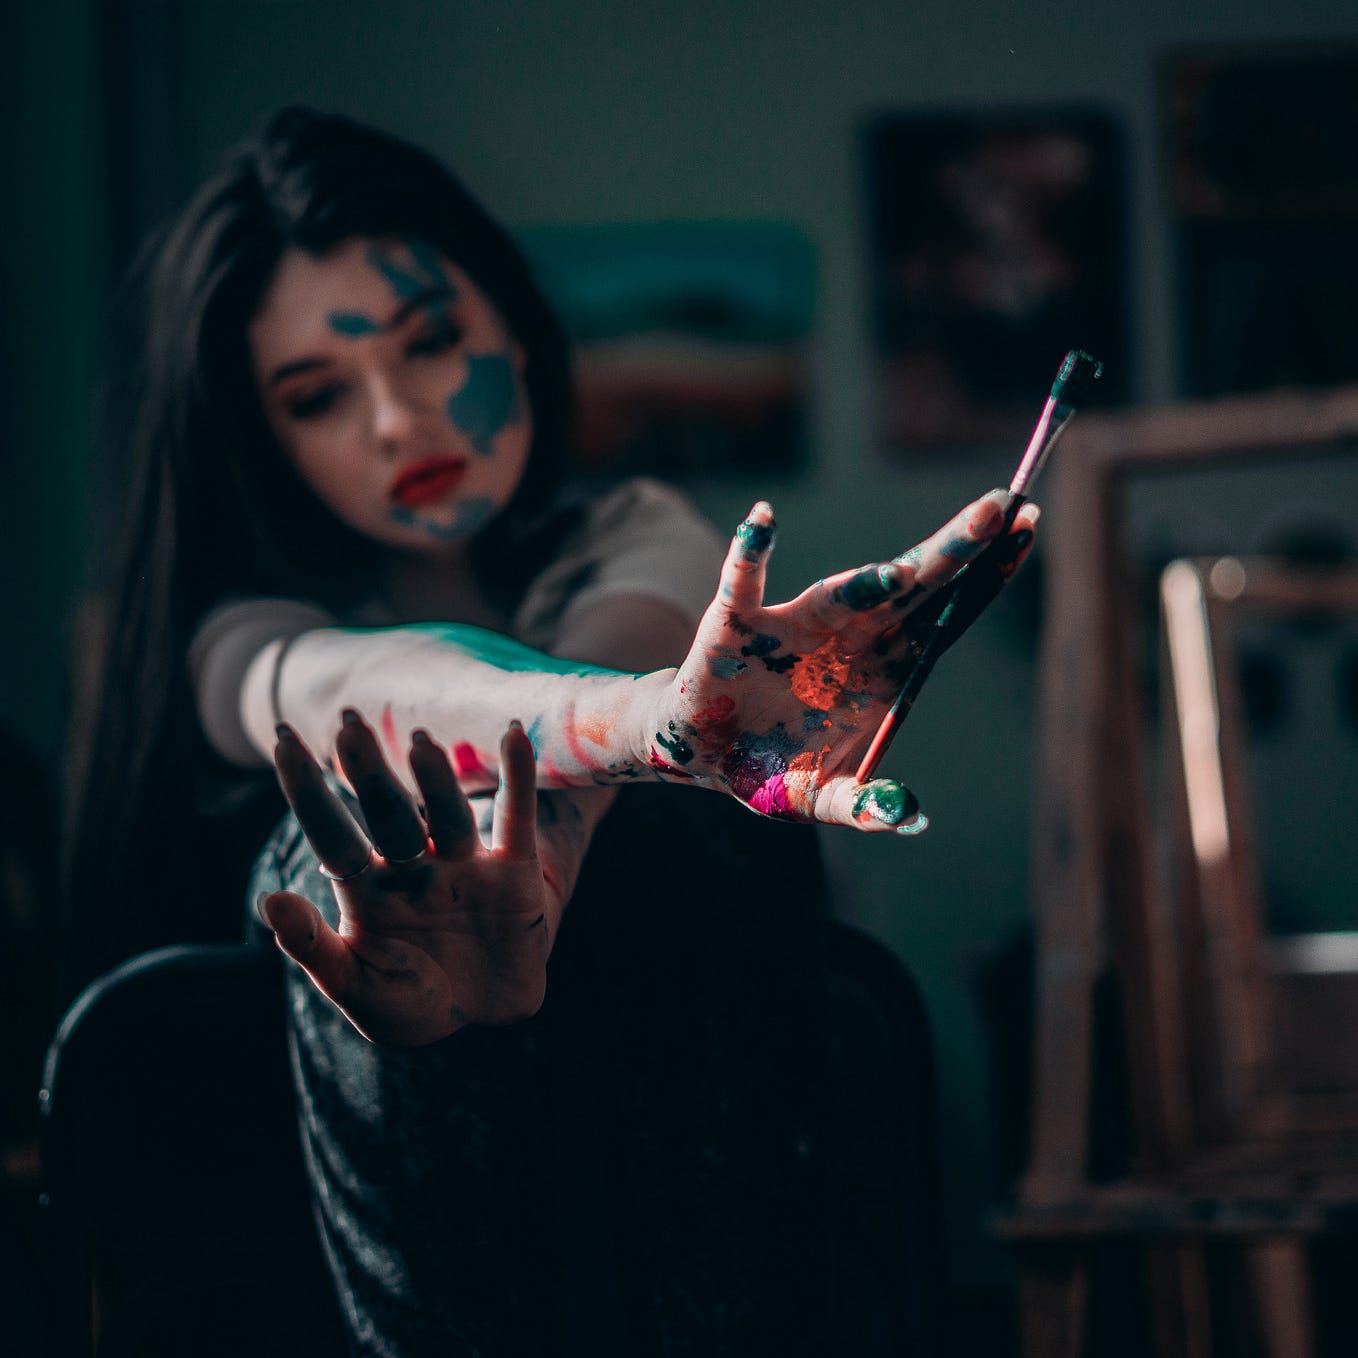 A woman covered in paint and holding a paint brush; her face is blurred in the background, with her hands in the foreground of the photo. She appears to be studying them.